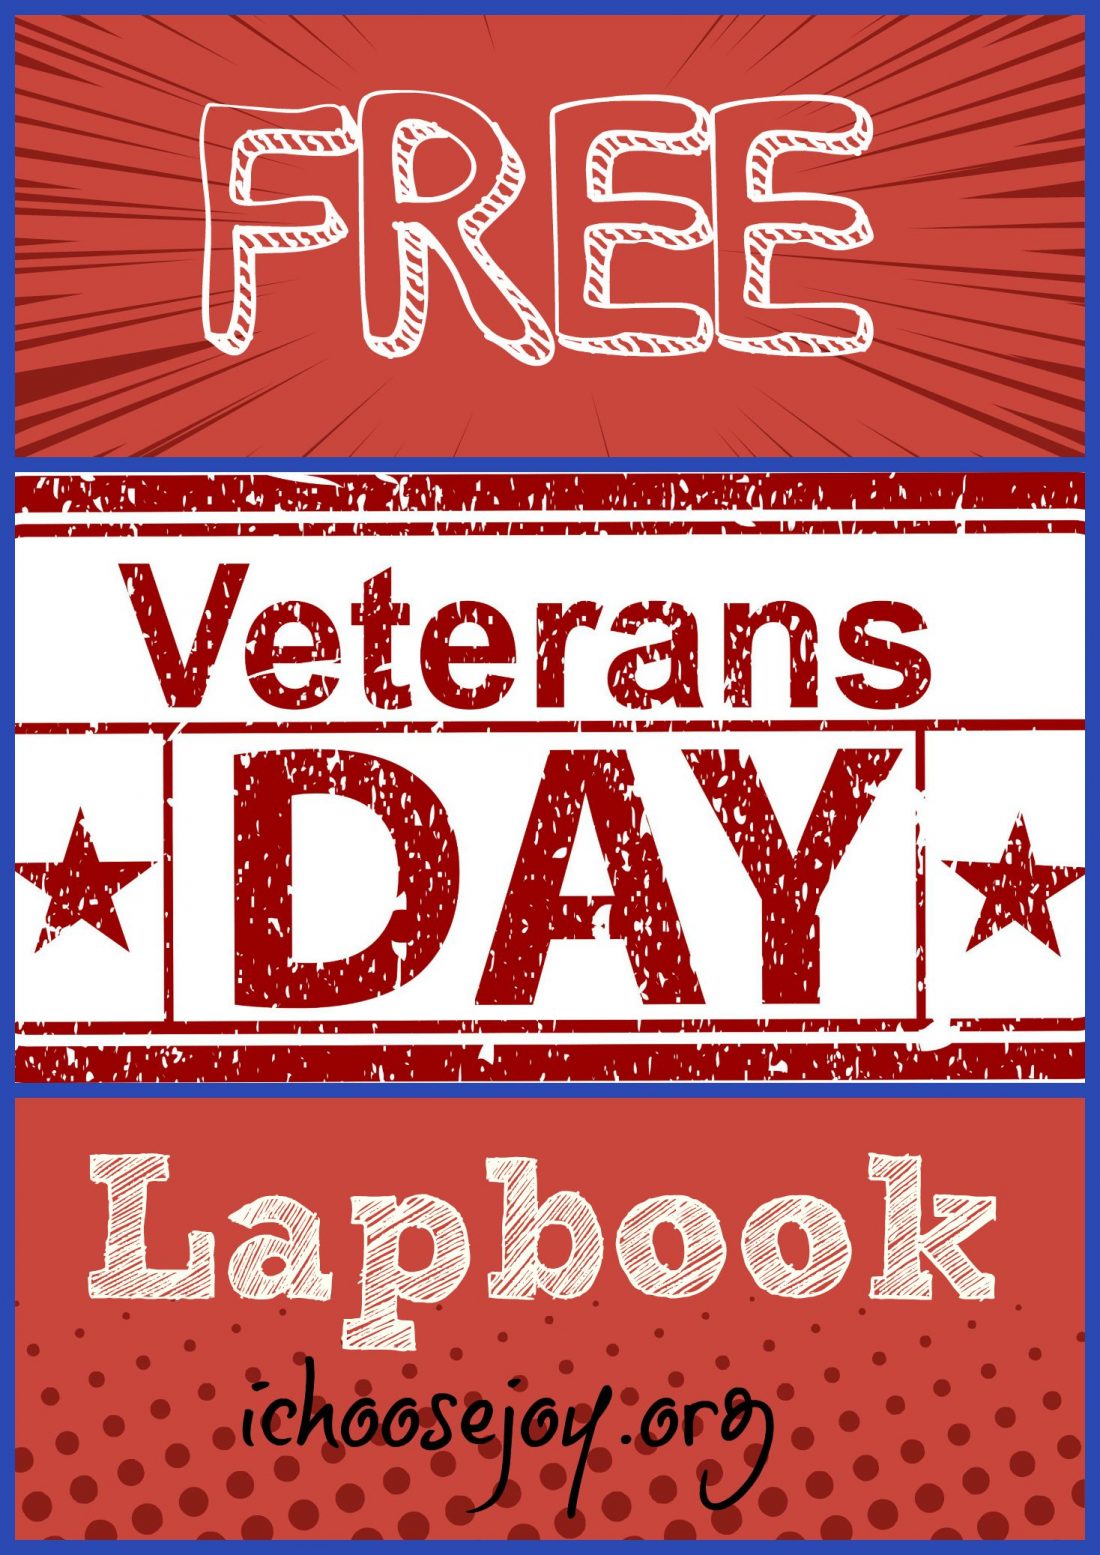 Free Veterans Day Lapbook, perfect for elementary students learning about Veterans Day #homeschool #veteransday #lapbook #elementary